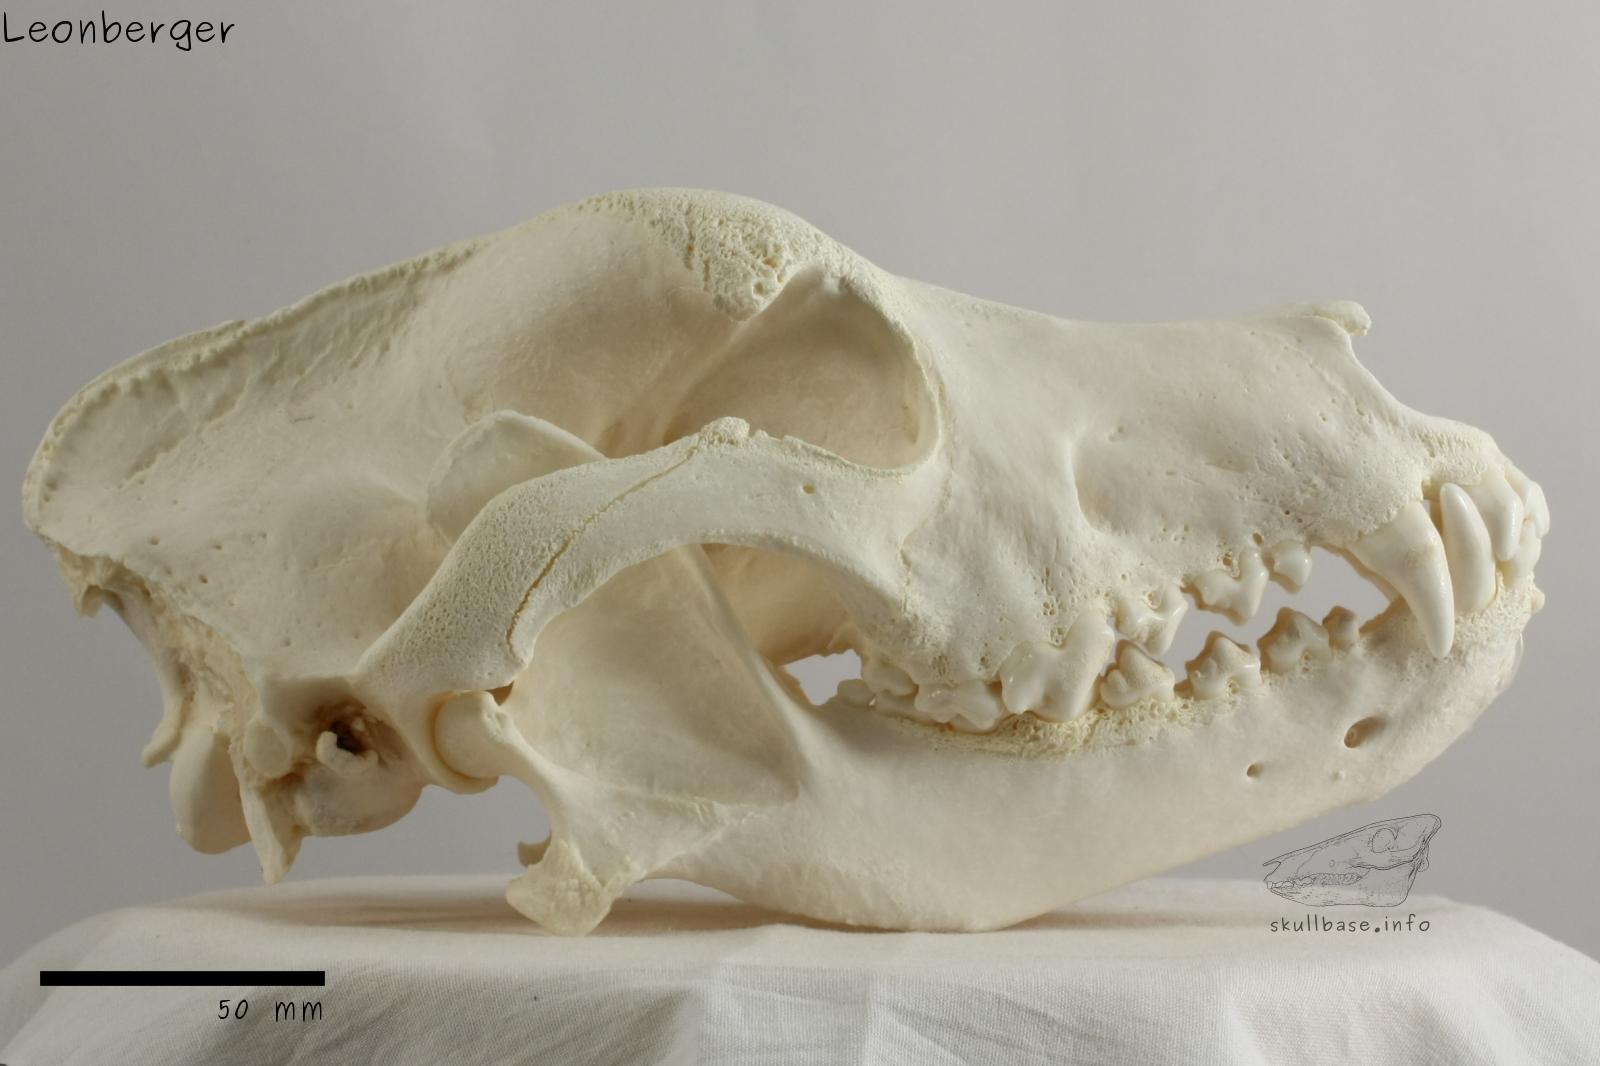 Leonberger (Canis lupus familiaris) skull lateral view